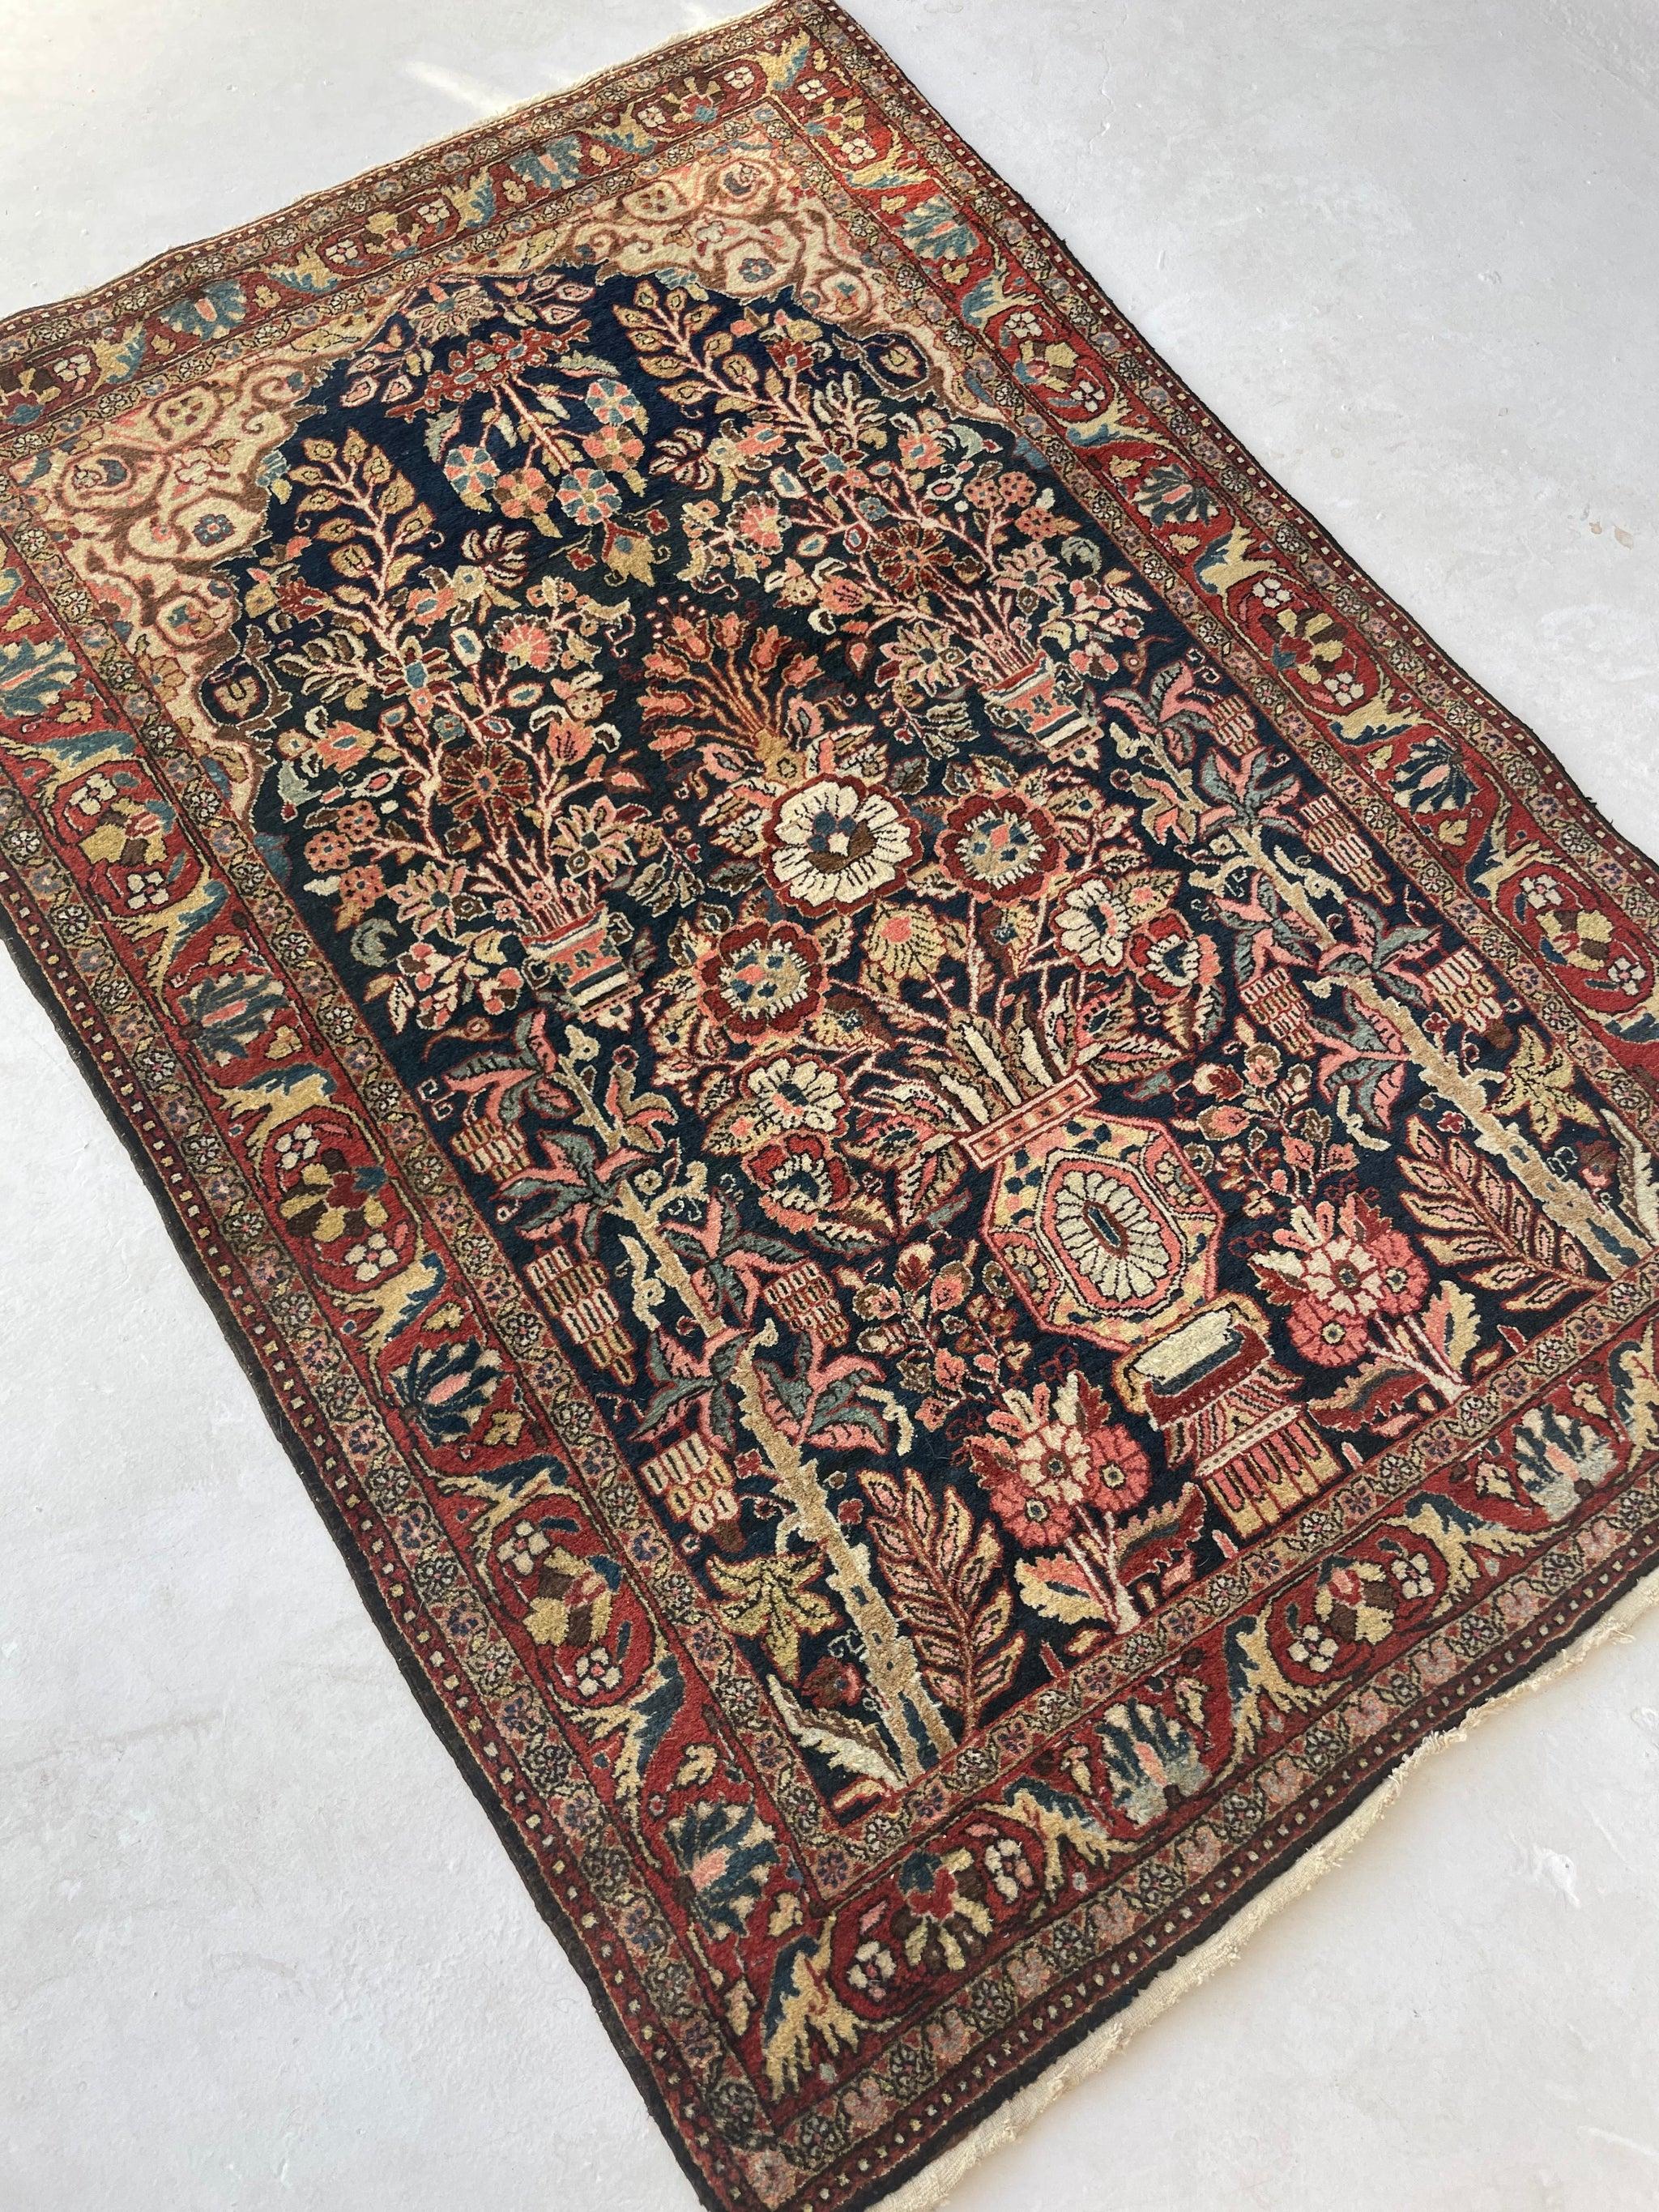 Flower Of Life  Royal Vintage Joshegan Sarouk Rug

Size: 3.6 x 5
Age: Vintage, C. 1950's or so
Pile: Medium with incredible wool pile; plush, soft and strong

This rug is one-of-a-kind, only one in the world, no others are available.

Because of the